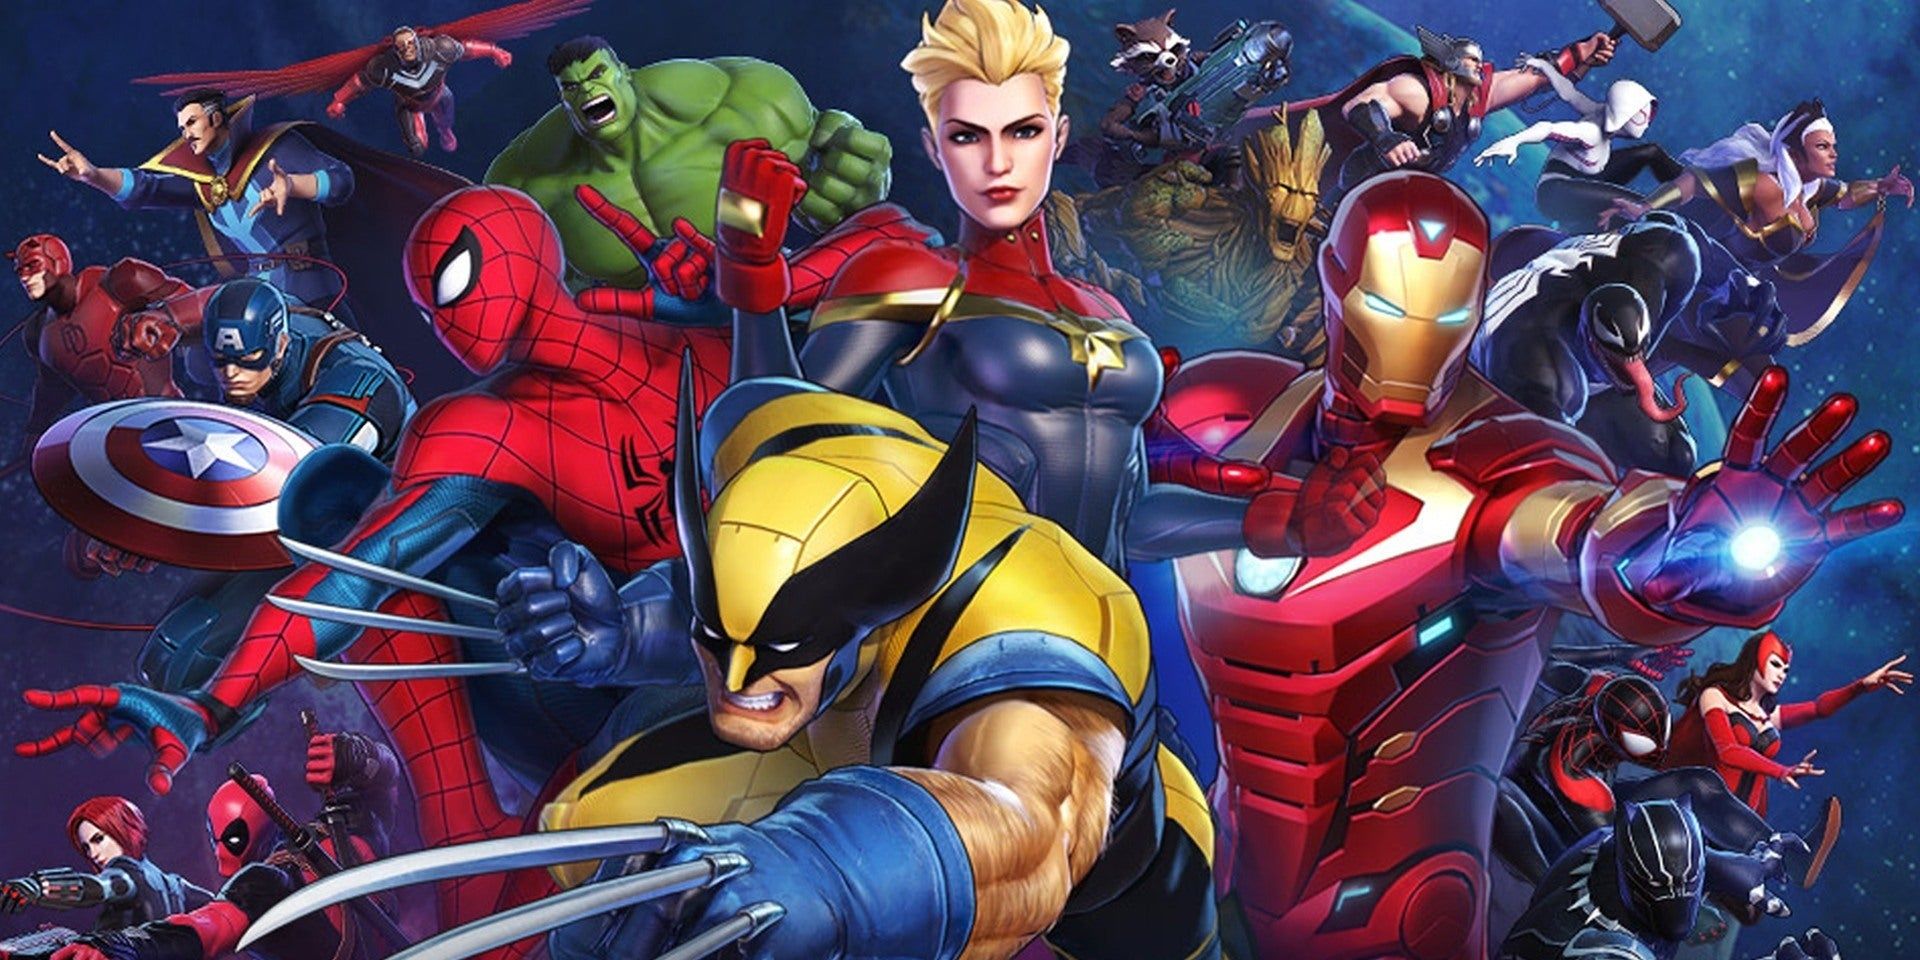 An image from Marvel Ultimate Alliance 3.